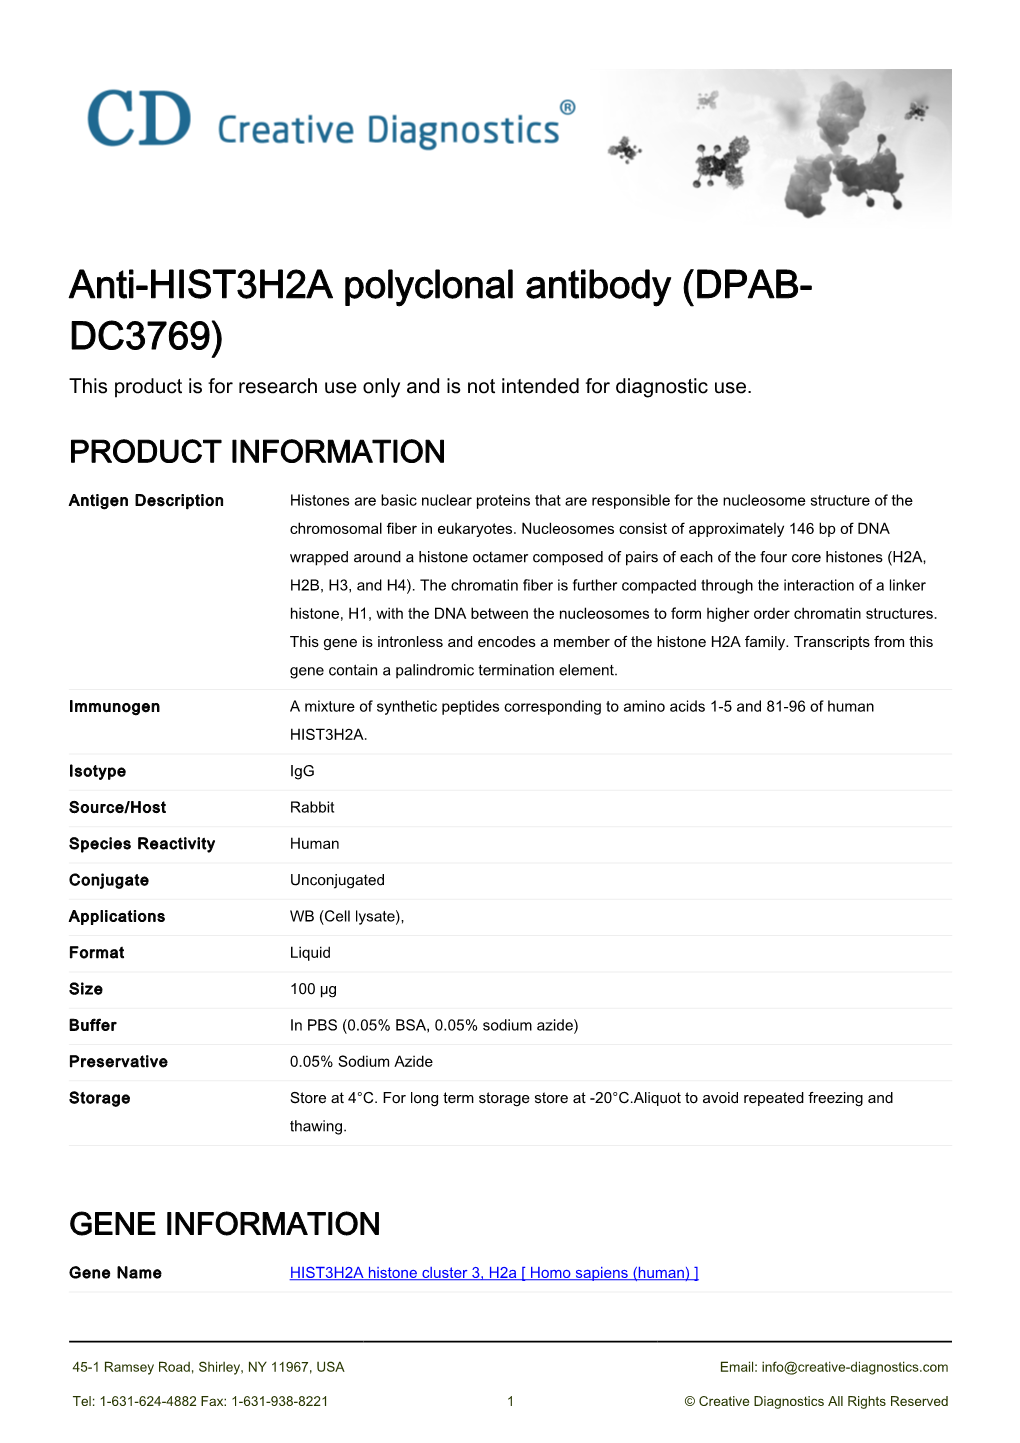 Anti-HIST3H2A Polyclonal Antibody (DPAB- DC3769) This Product Is for Research Use Only and Is Not Intended for Diagnostic Use